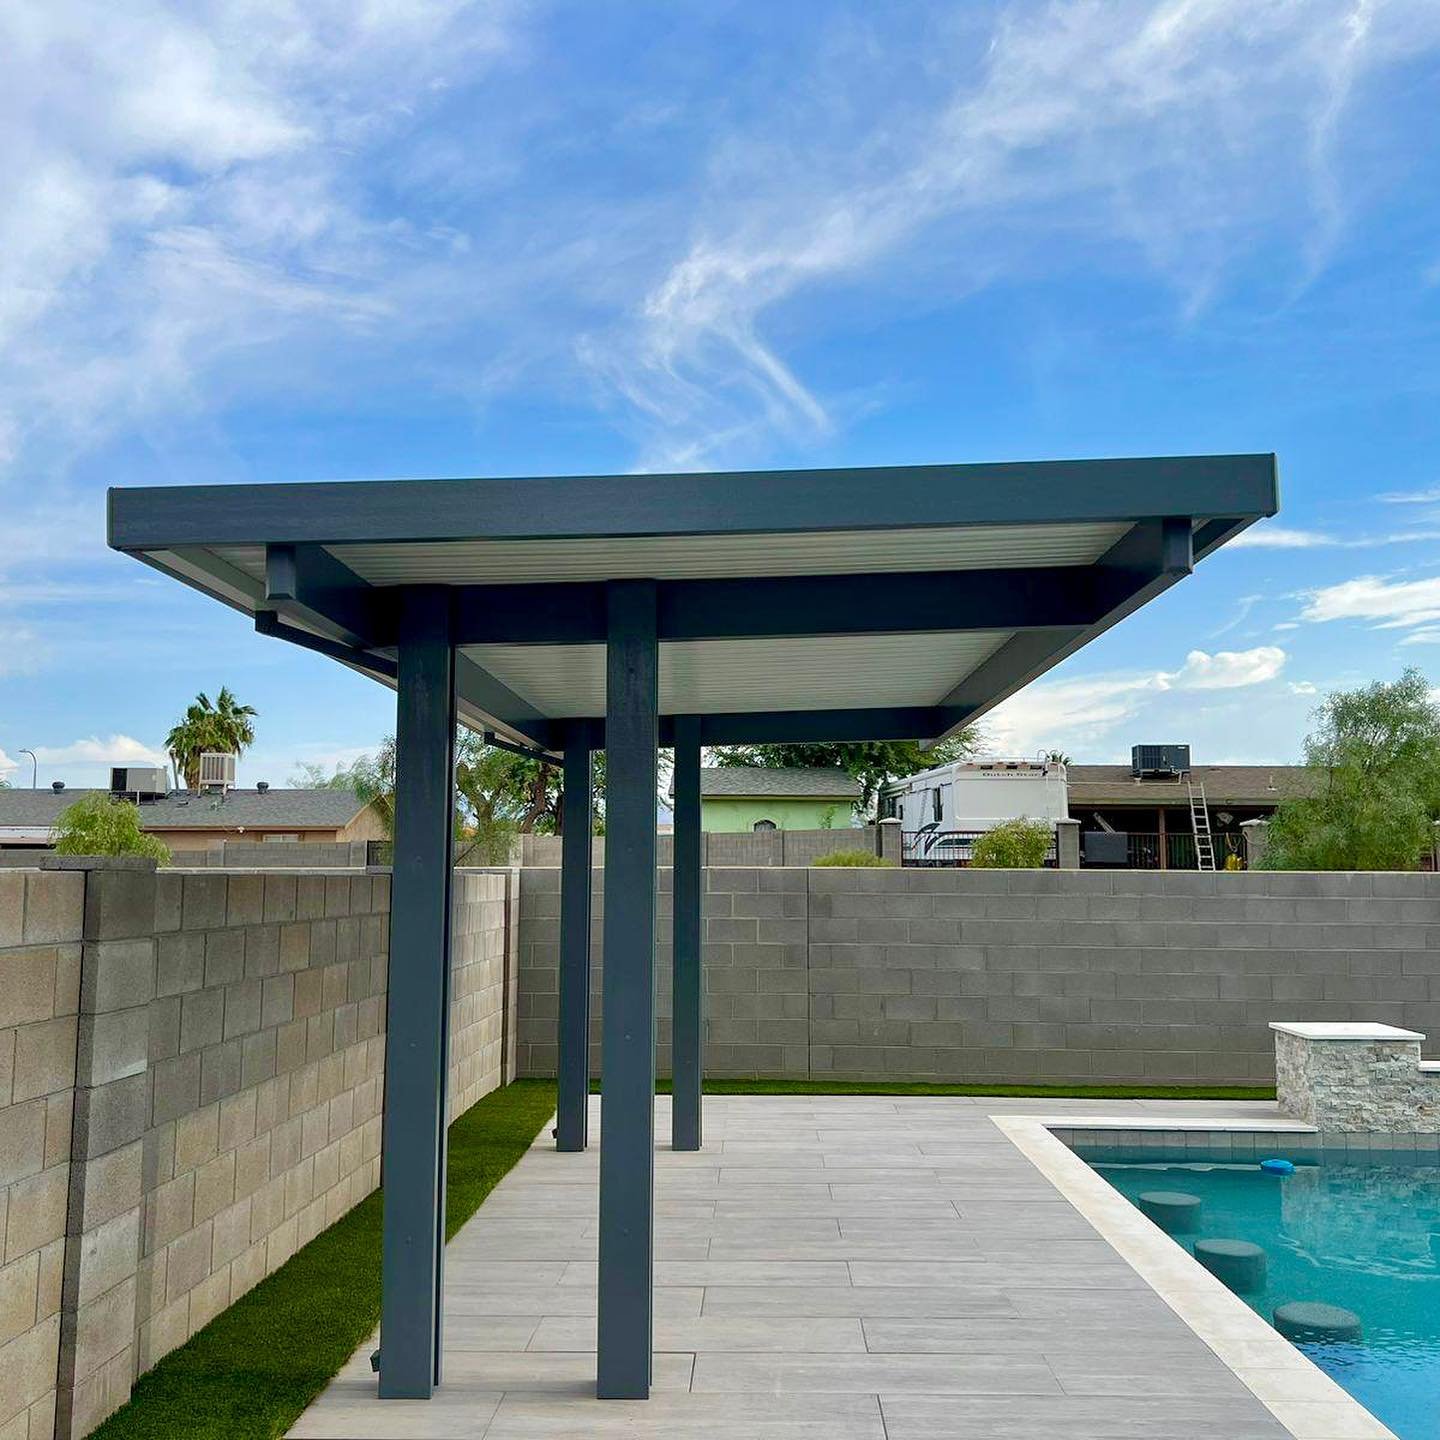 Solid Flat Pan Cover Services, Outshine Patio Cover near Phoenix AZ